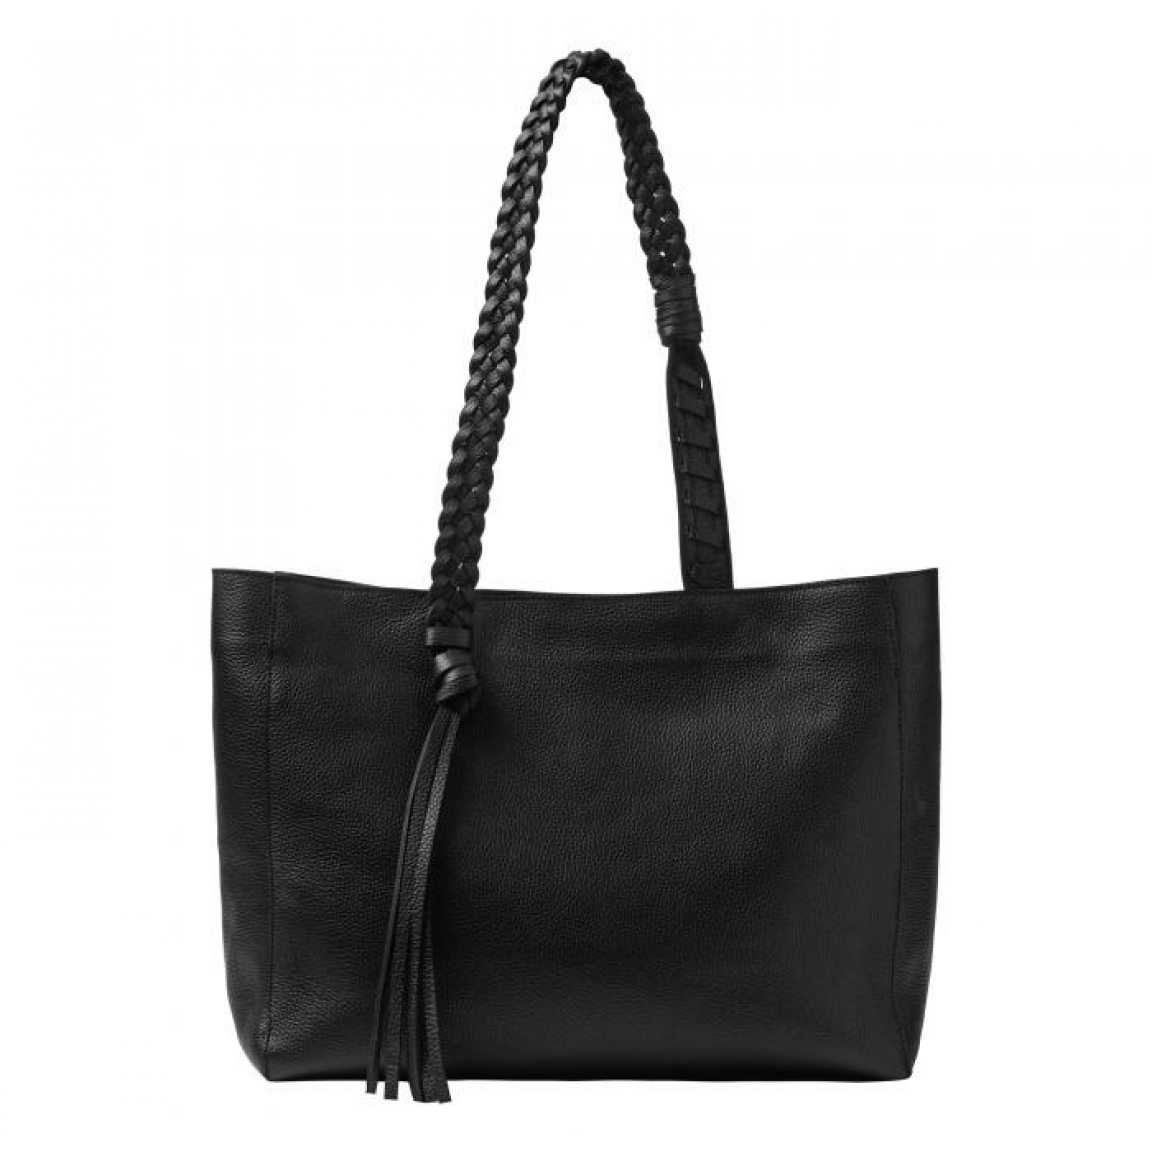 Large black leather tote